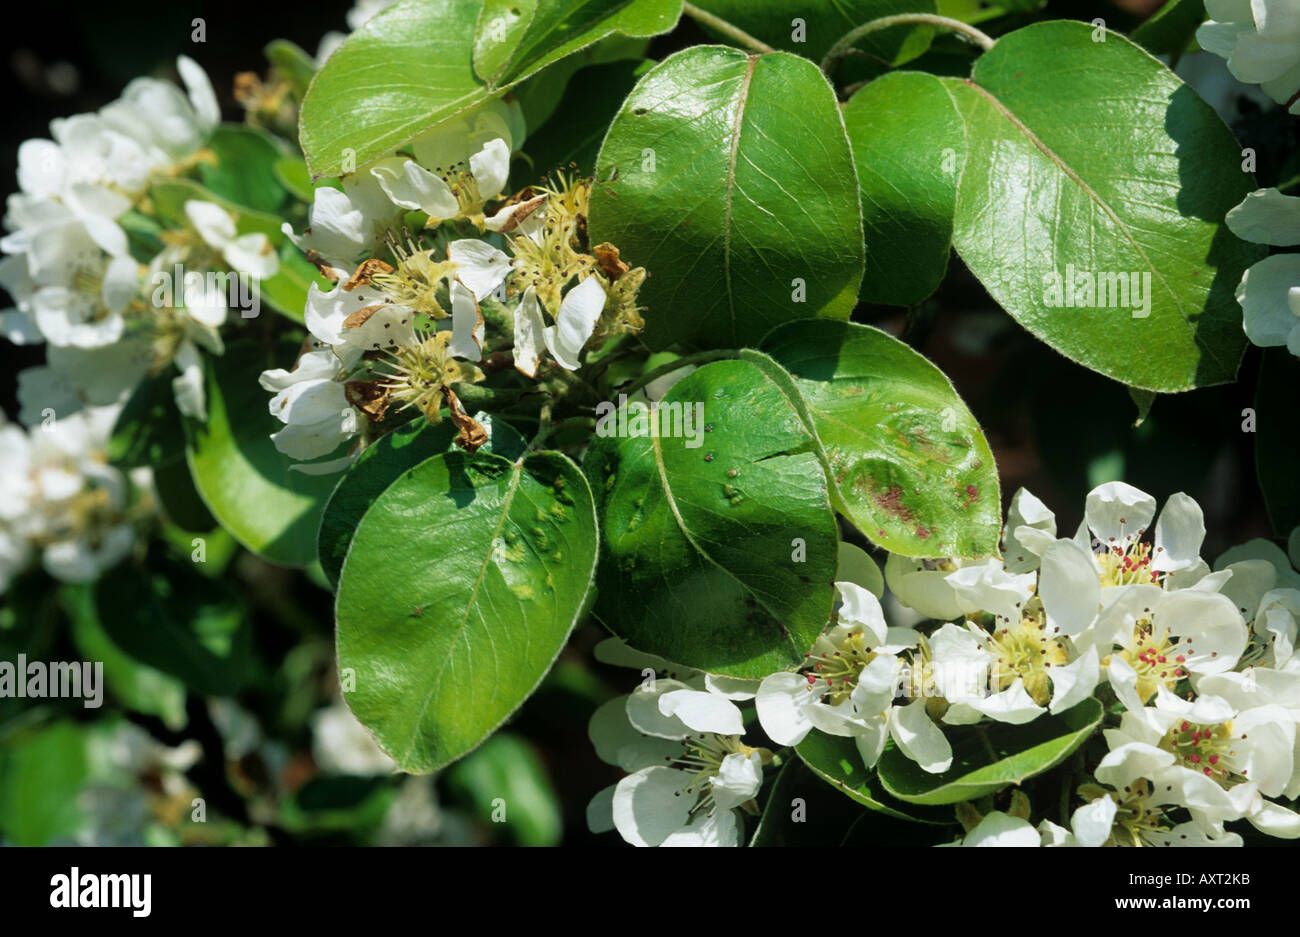 Pear leaf blister mite Eriophyes pyri damage to young pear leaves Stock Photo